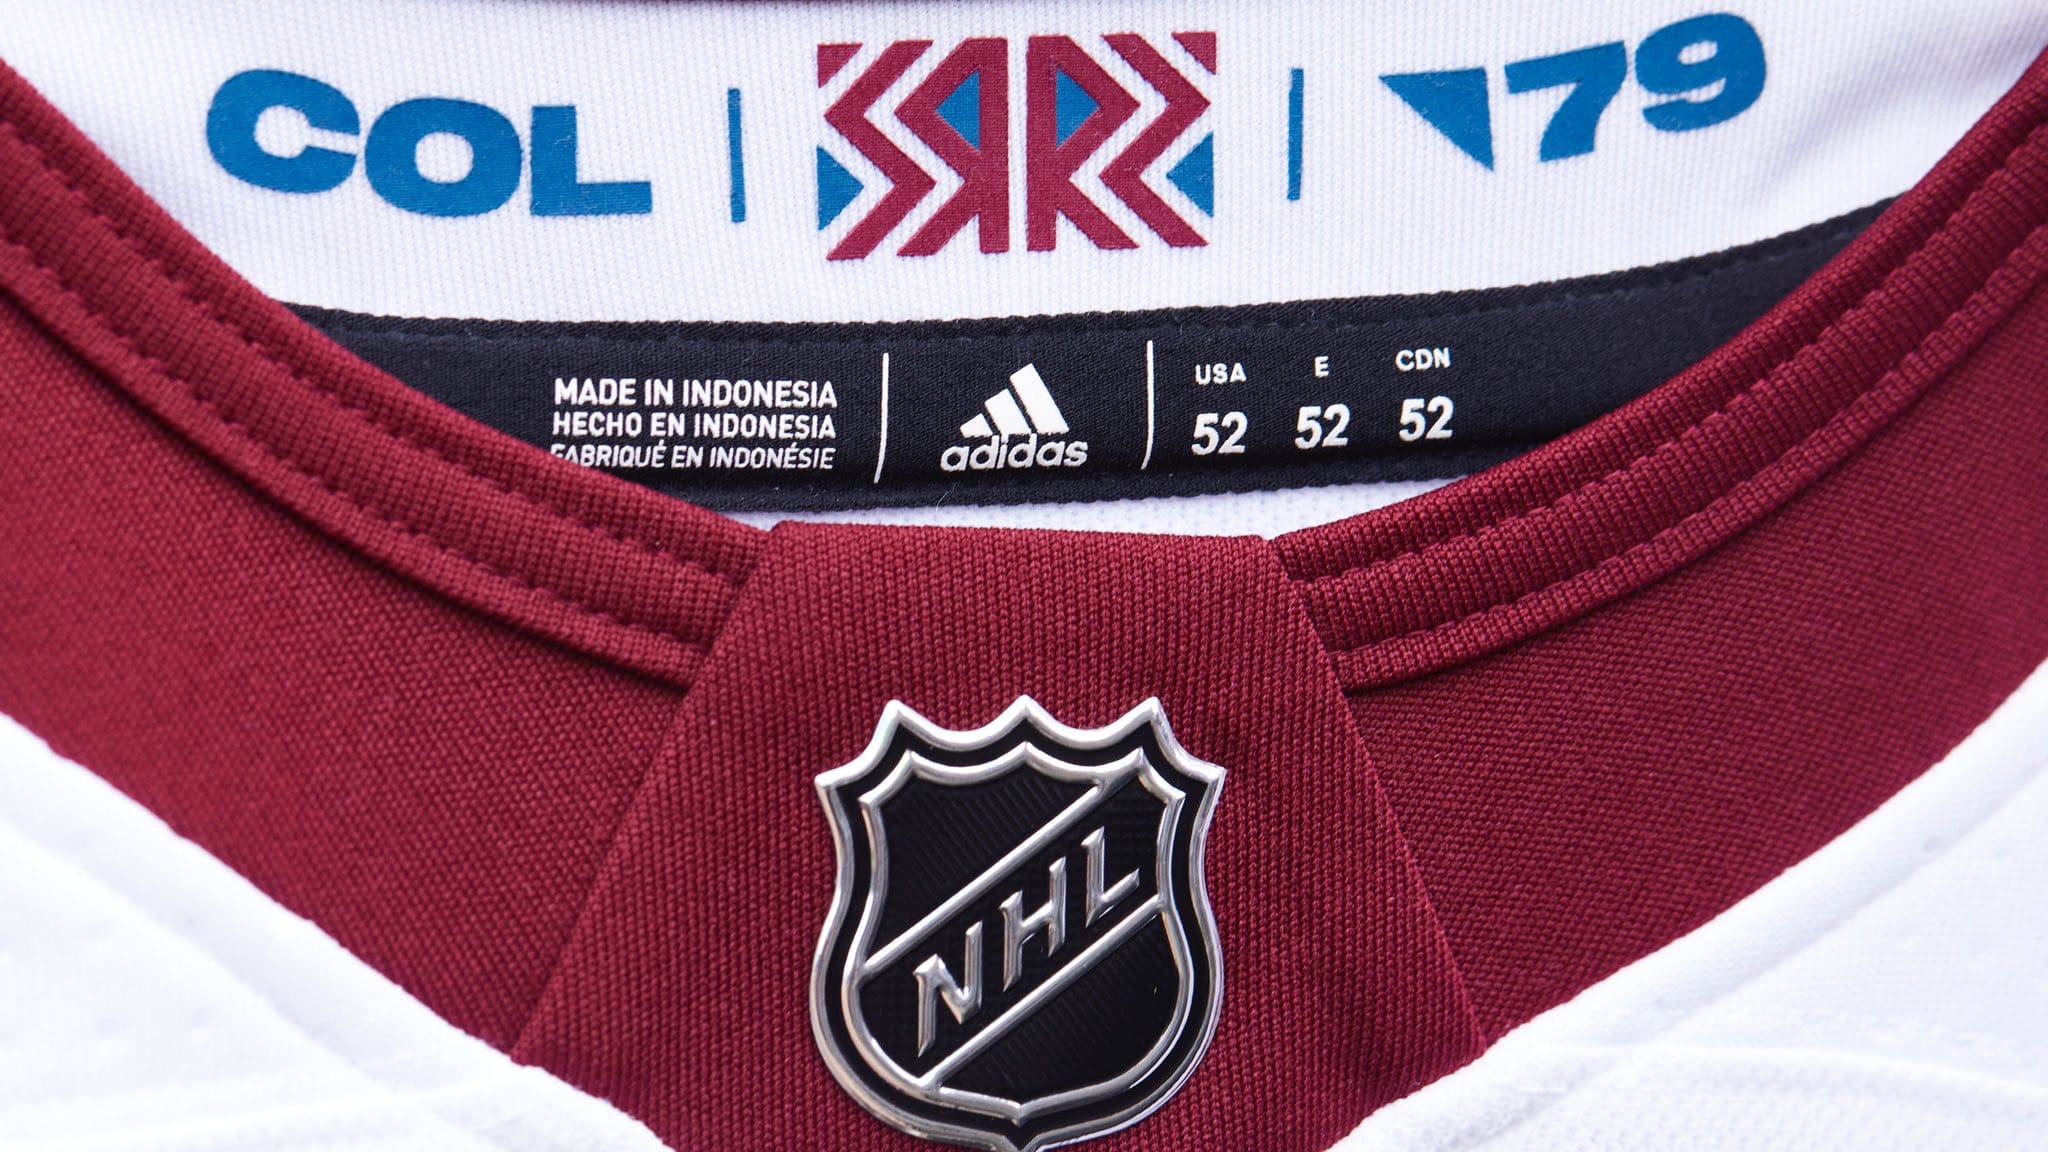 Would Colorado Avalanche wearing Nordiques Jerseys be a good idea?